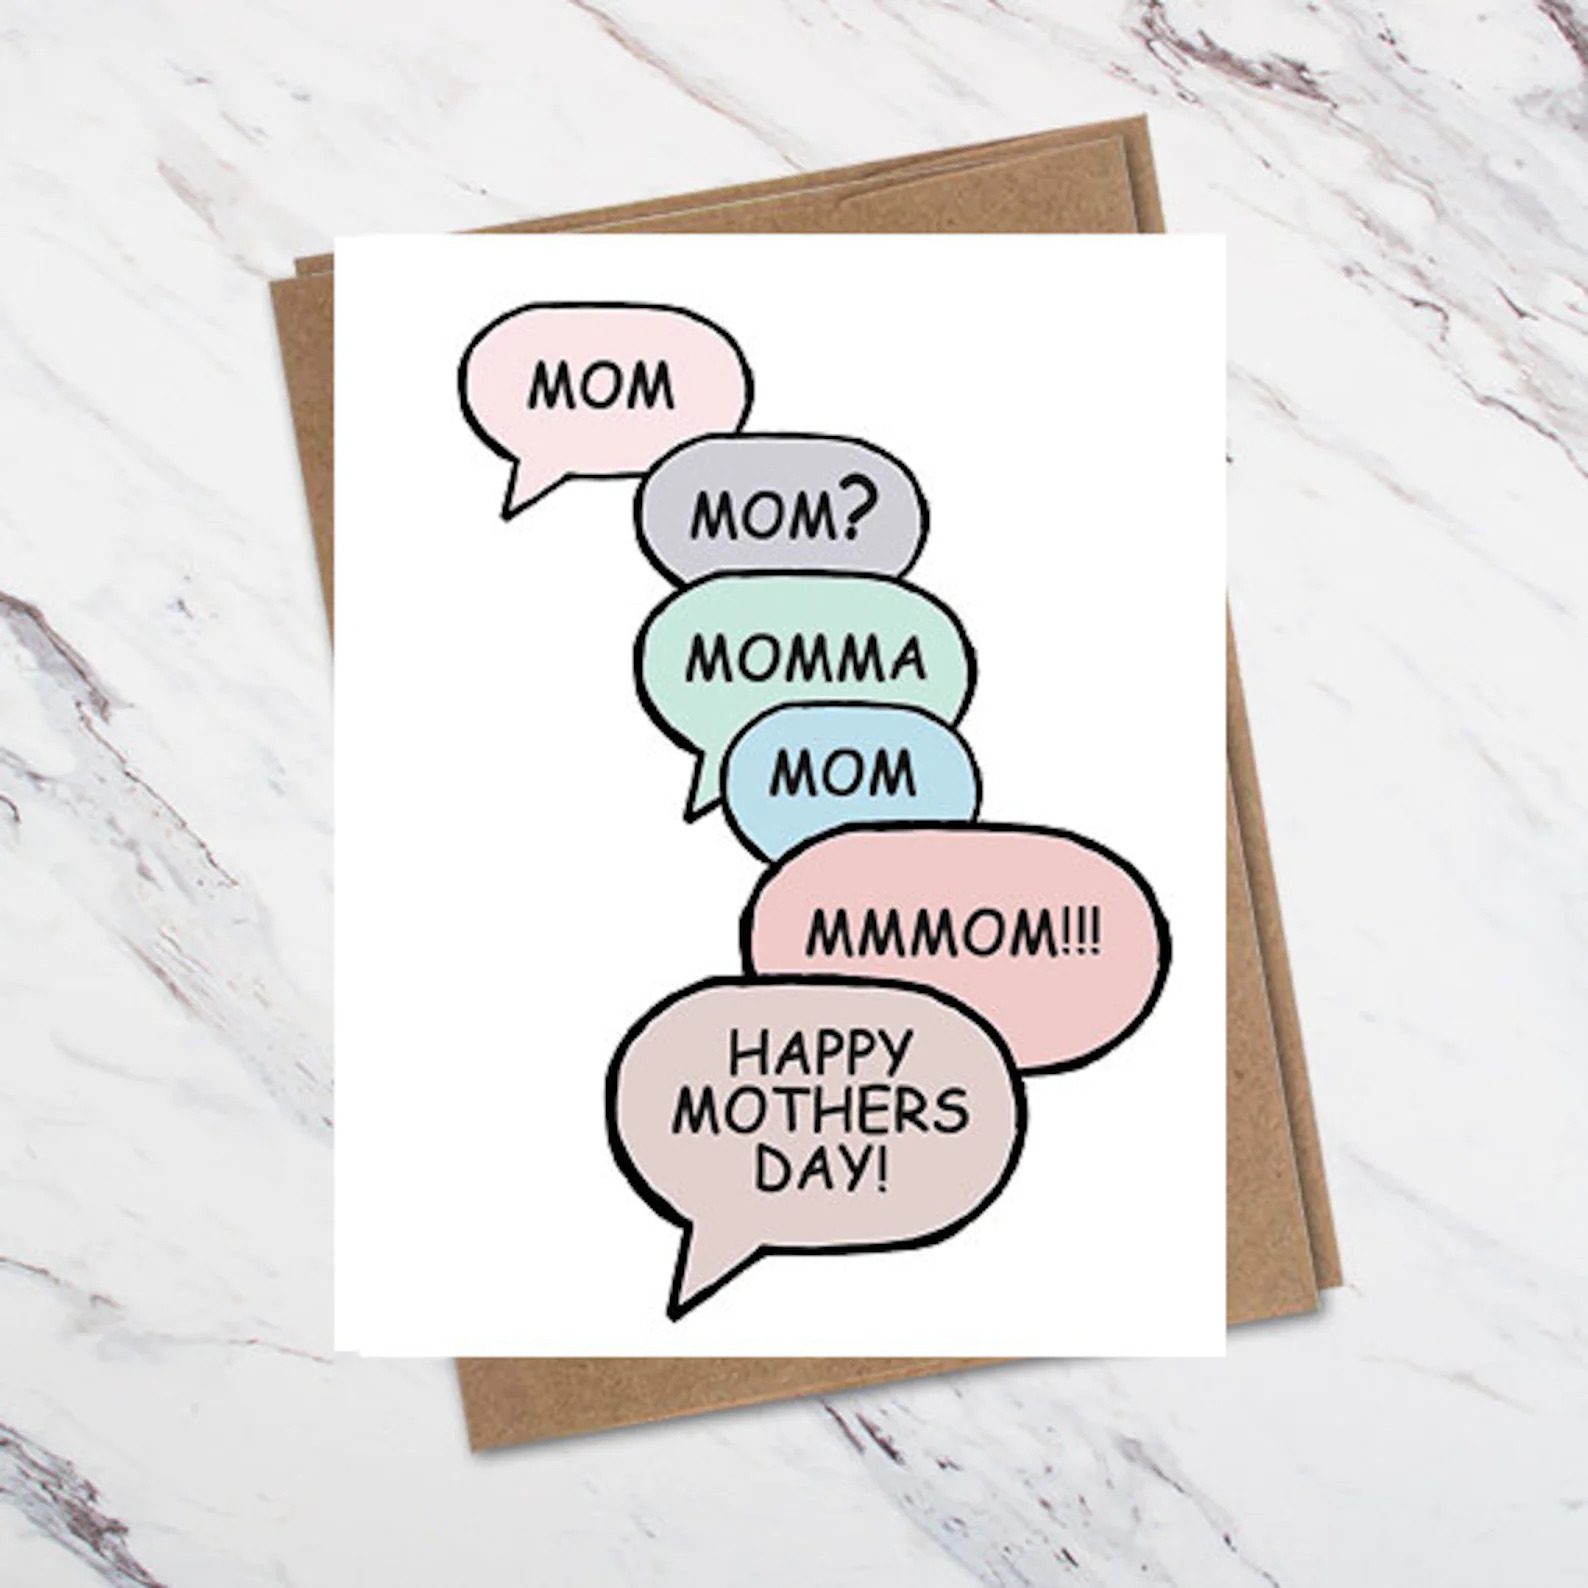 https://www.rd.com/wp-content/uploads/2022/04/mom-momma-mmmom-mothers-day-card-ecomm-via-etsy.com_.jpg?fit=700%2C700